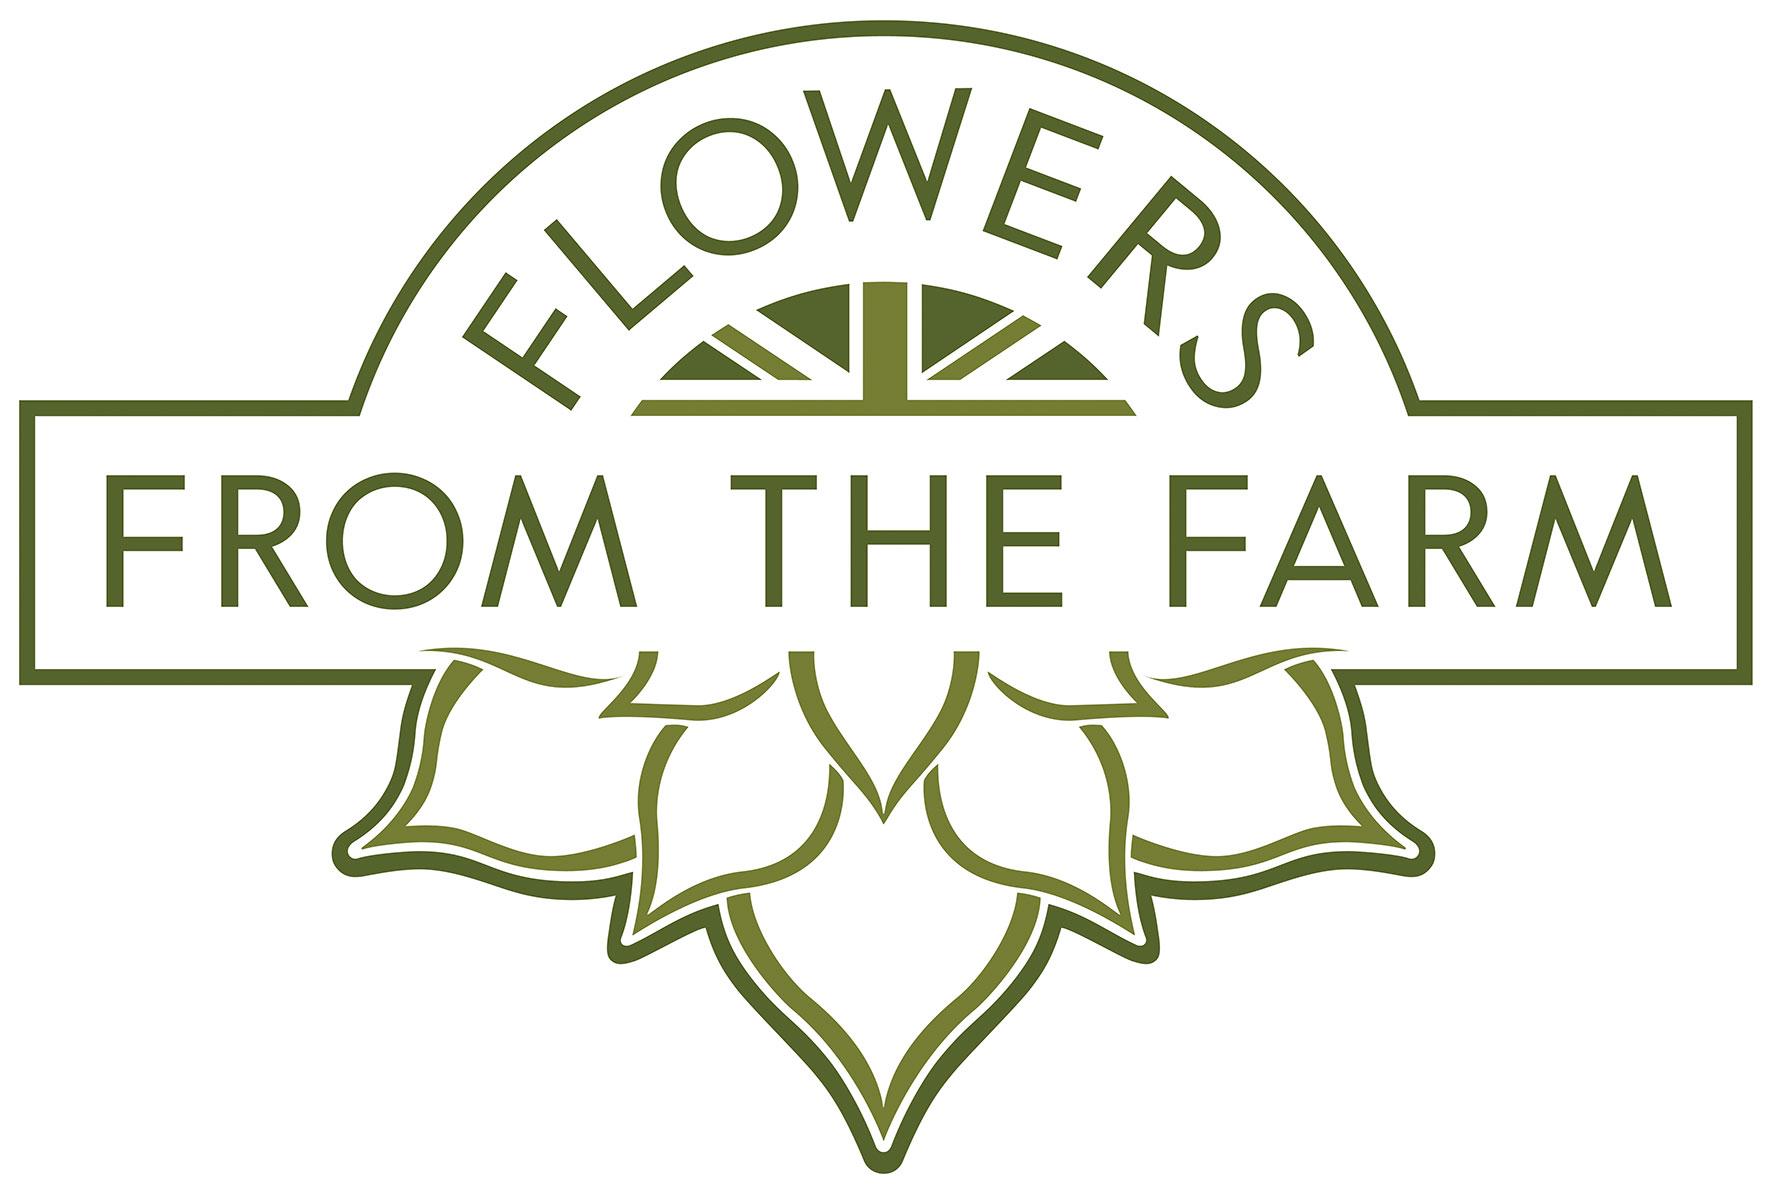 Flowers of the farm